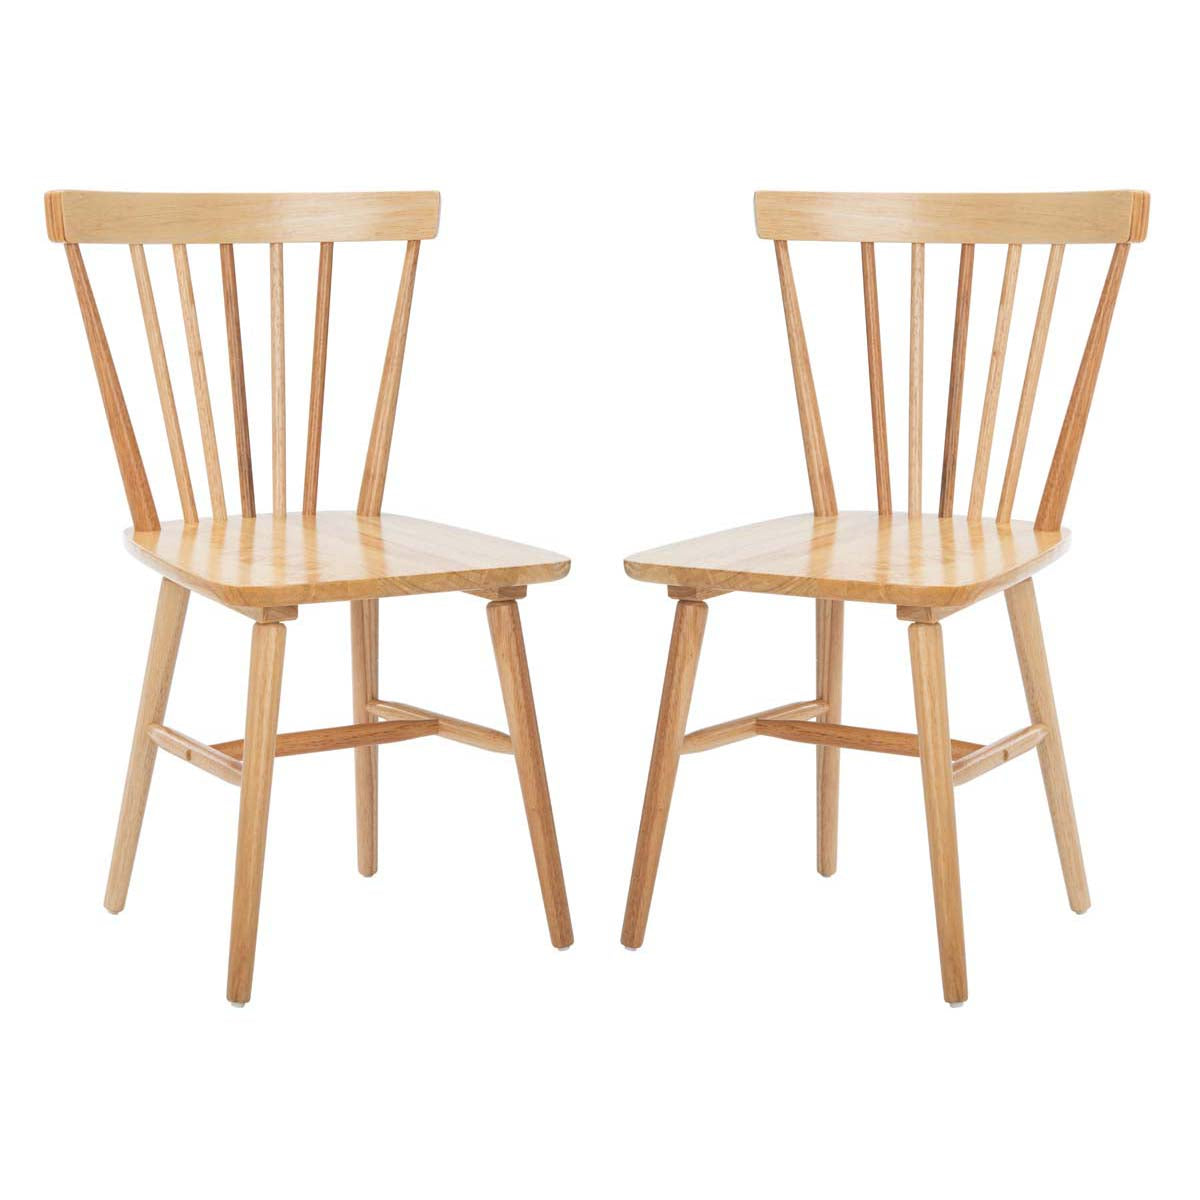 Safavieh Winona Spindle Back Dining Chair, DCH8500